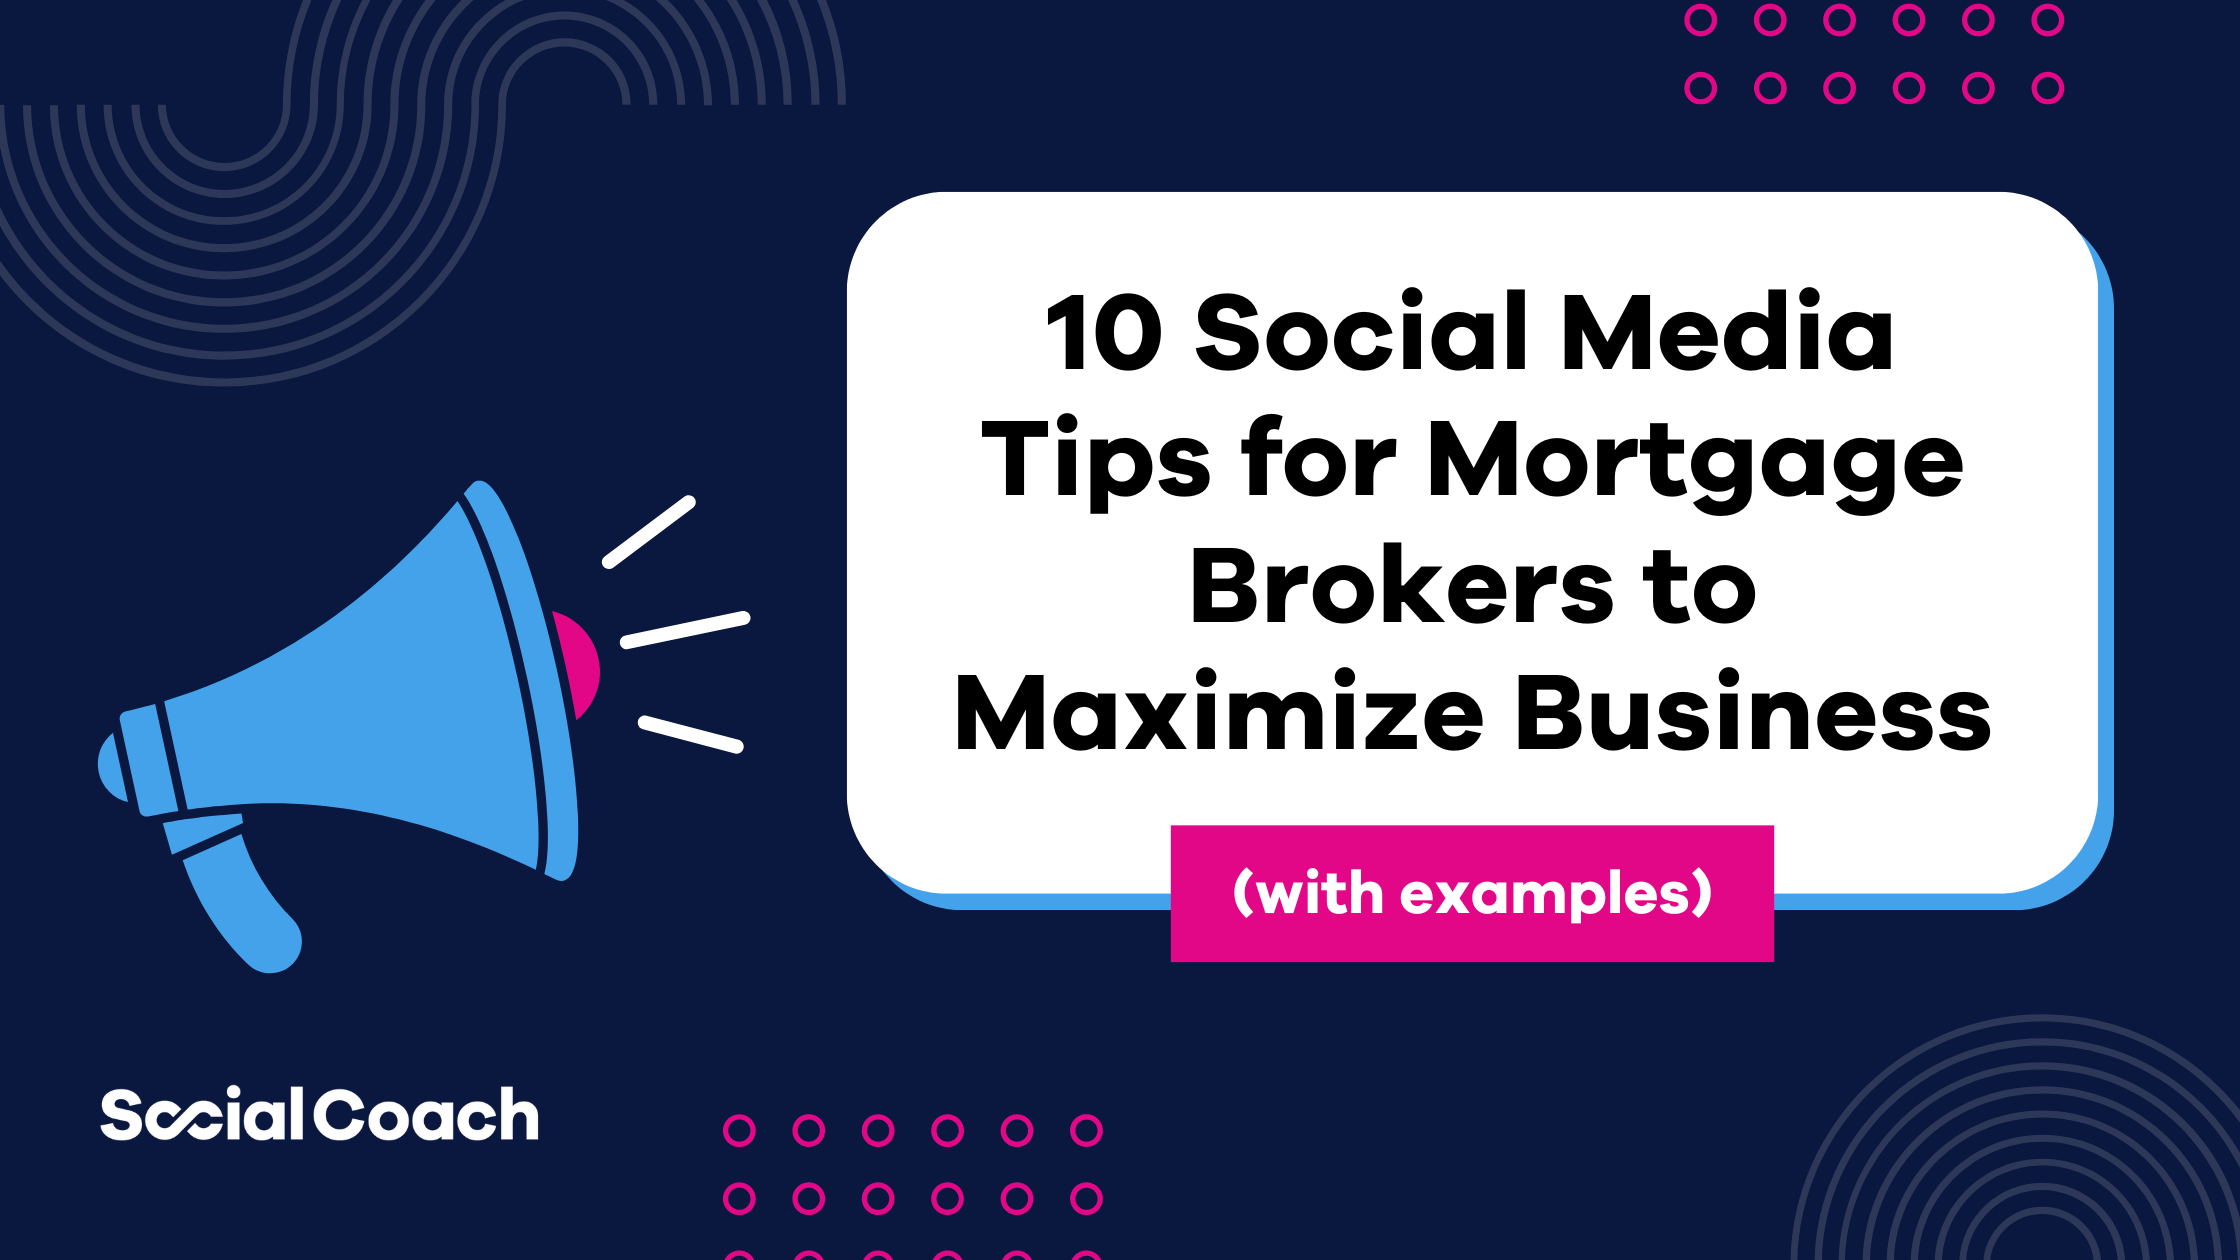 10 Social Media Tips for Mortgage Brokers to Maximize Business Blog Banner